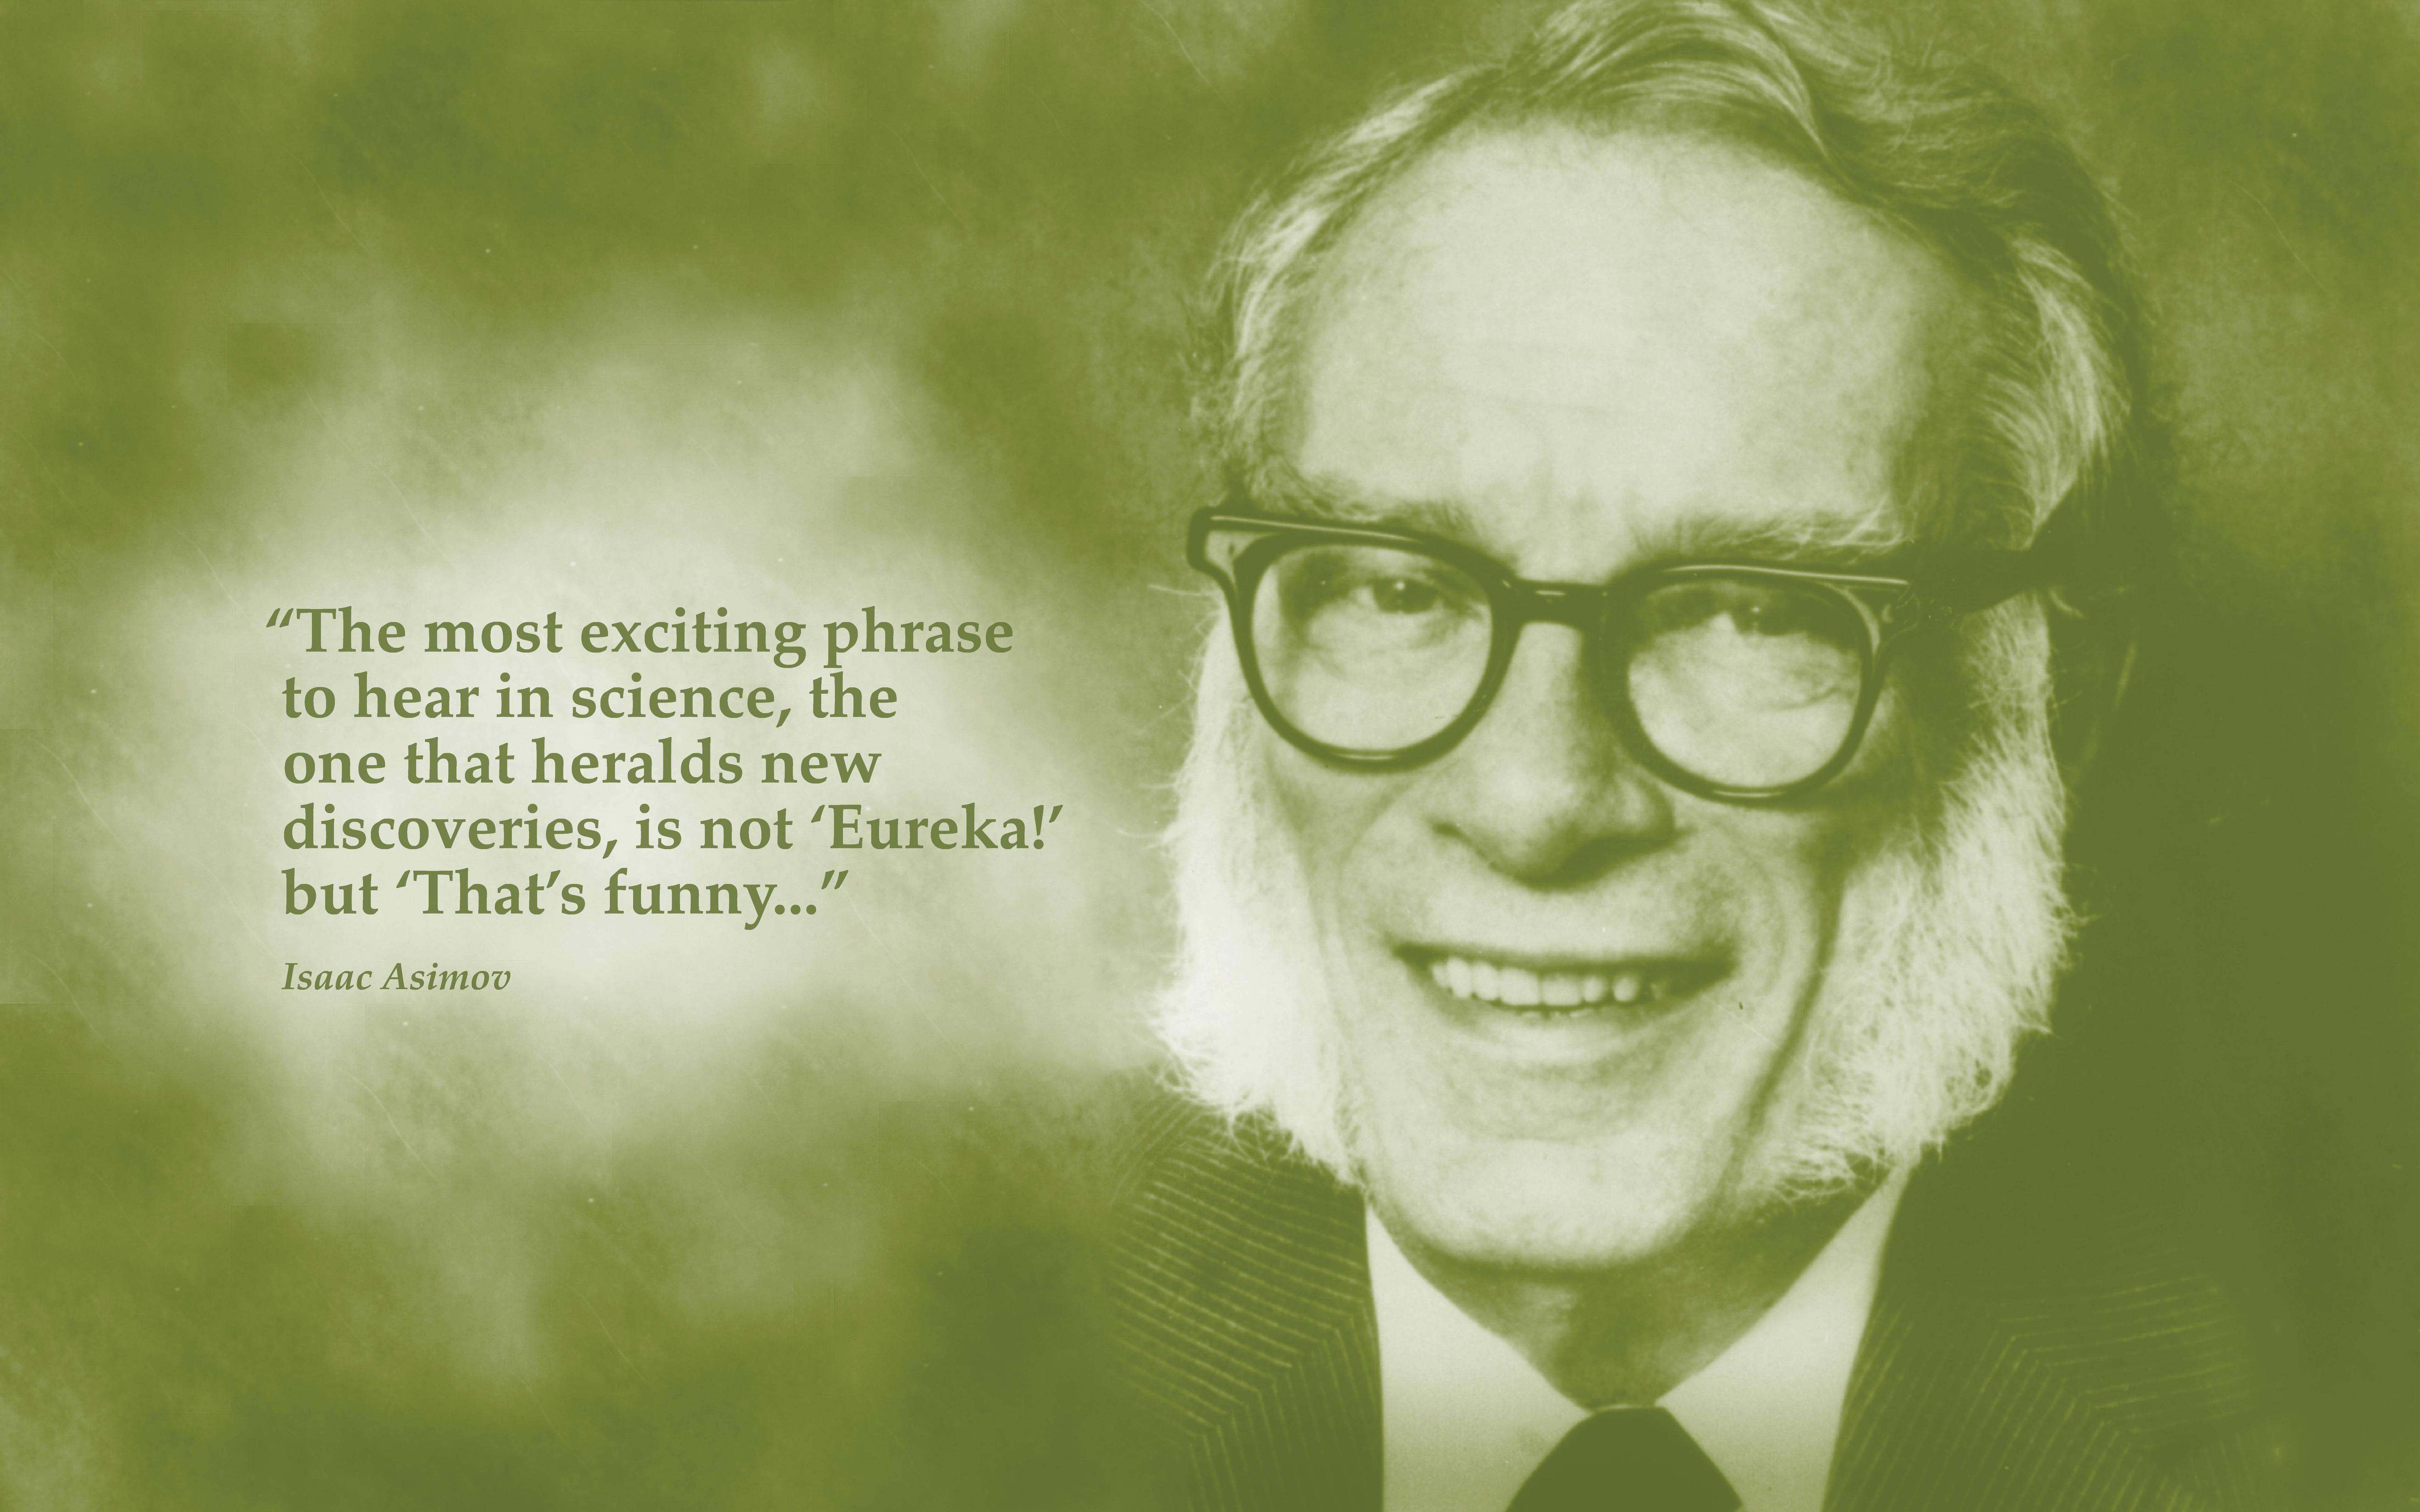 Wallpaper set of (mostly) Scientist quotes